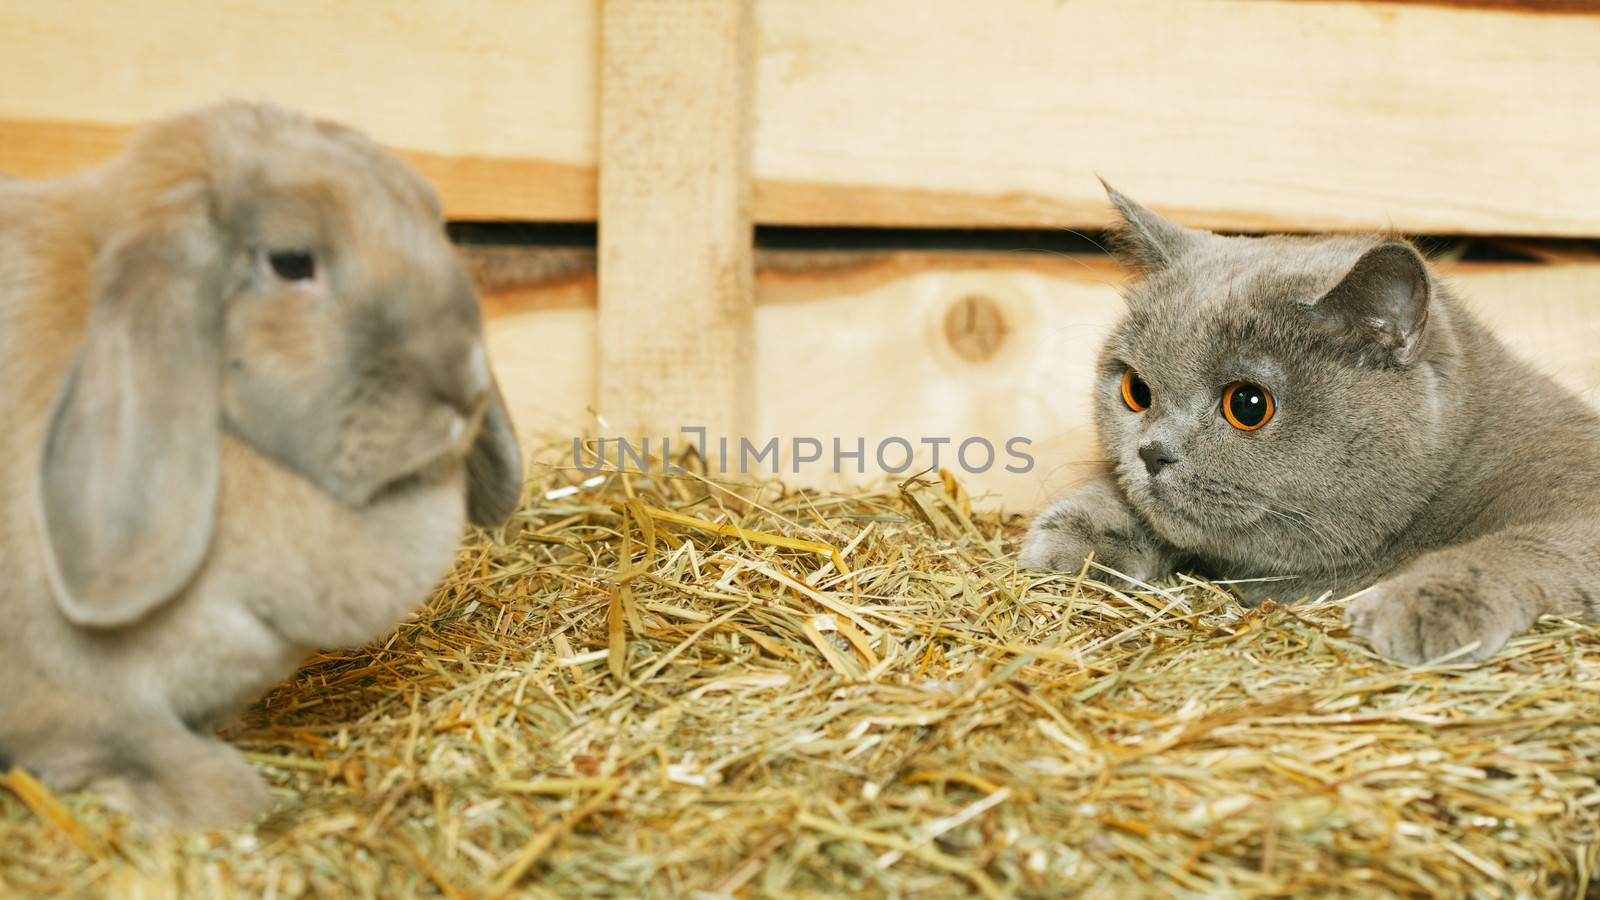 Cat and Rabbit by petr_malyshev